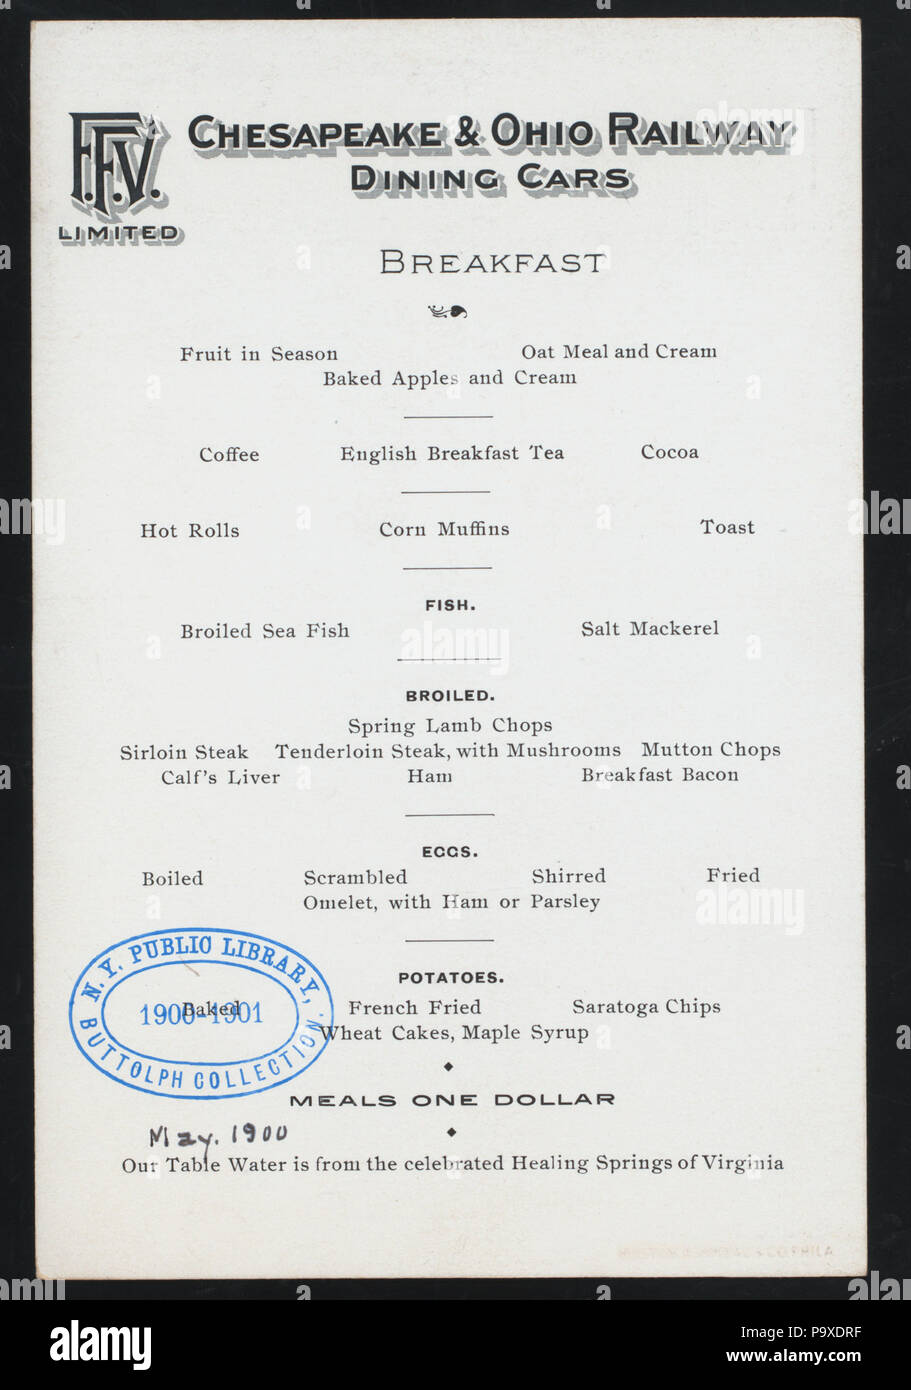 233 BREAKFAST (held by) CHESAPEAKE &amp; OHIO RAILWAY (at) FFV LIMITED DINING CARS (RR;) (NYPL Hades-273866-467281) Stock Photo